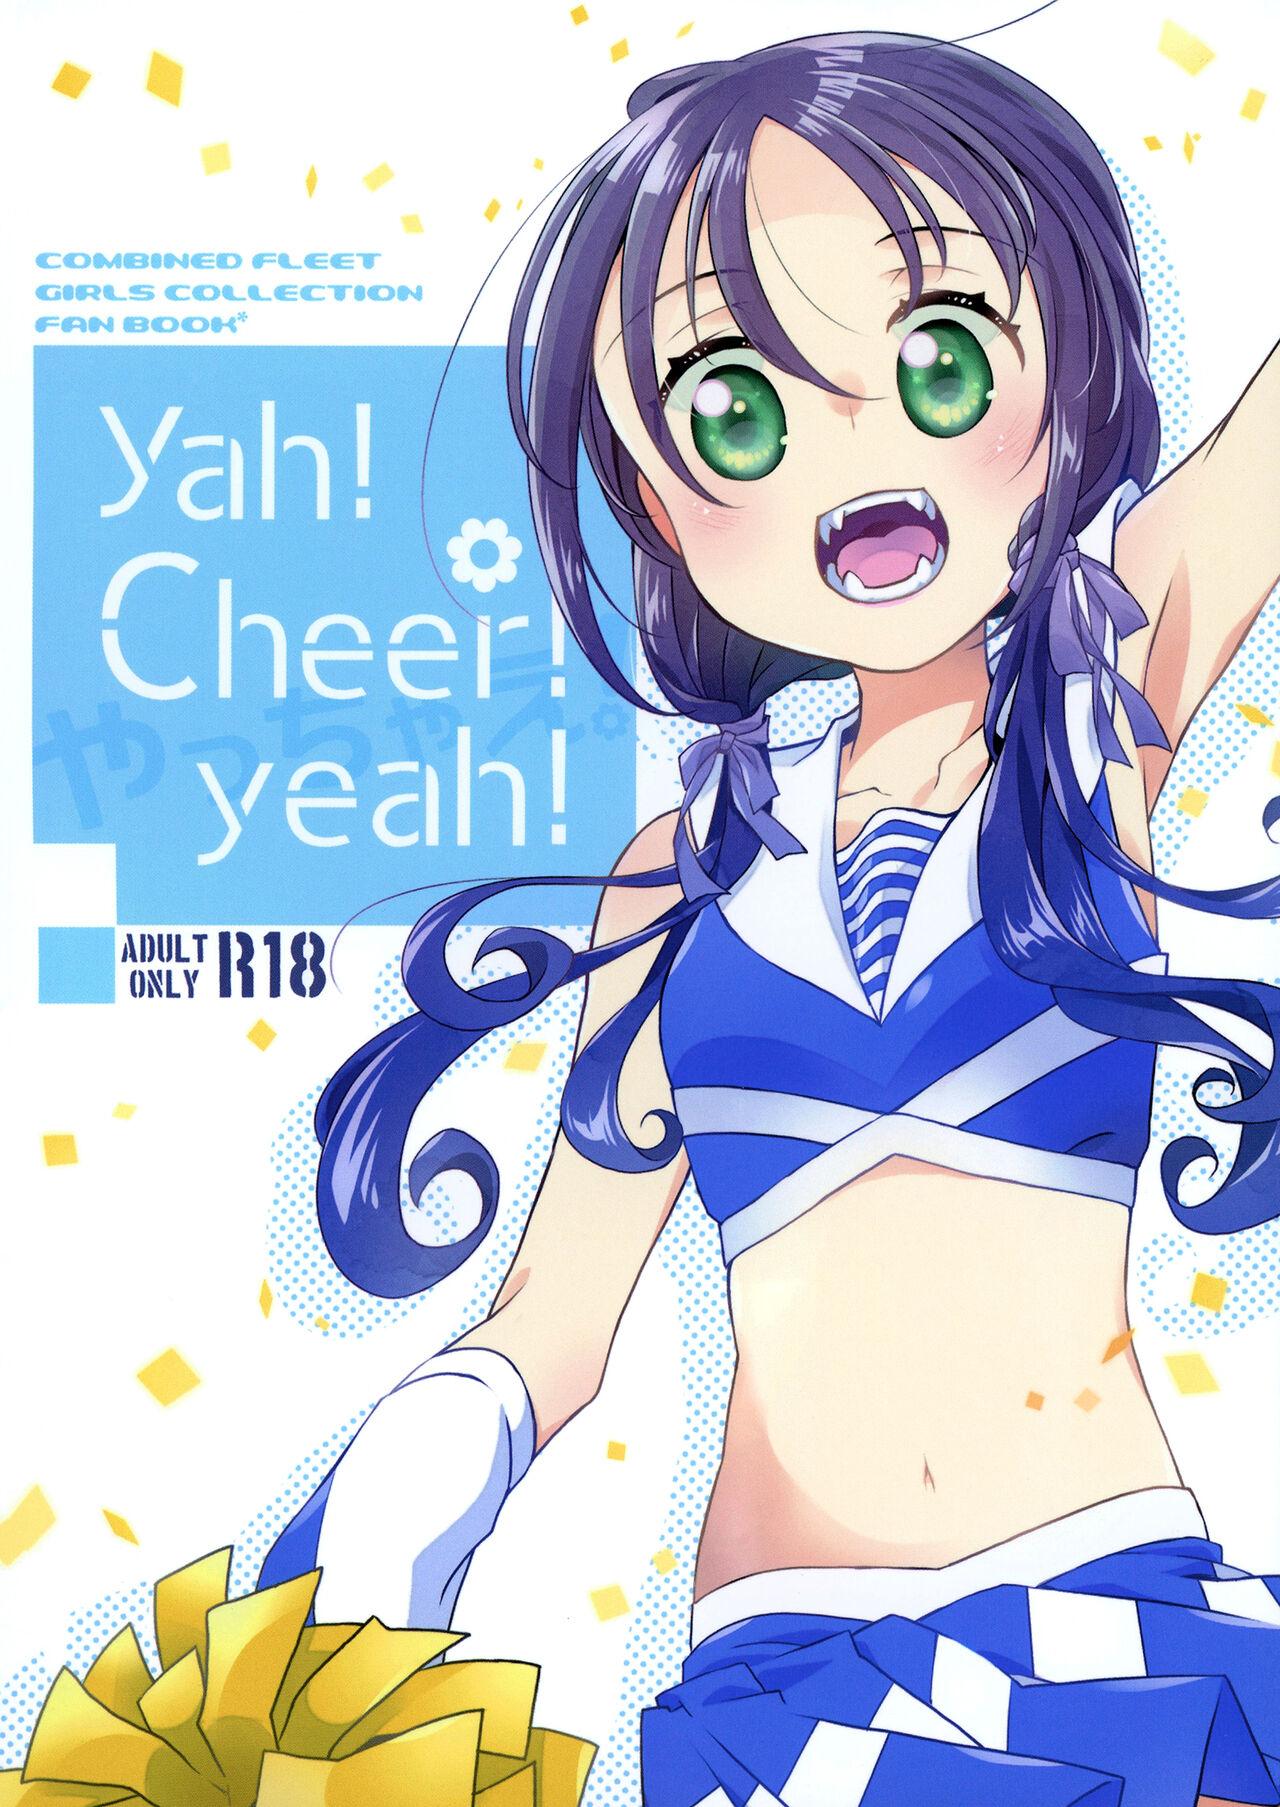 Interview Yah! Cheer! yeah! - Kantai collection Twistys - Picture 1